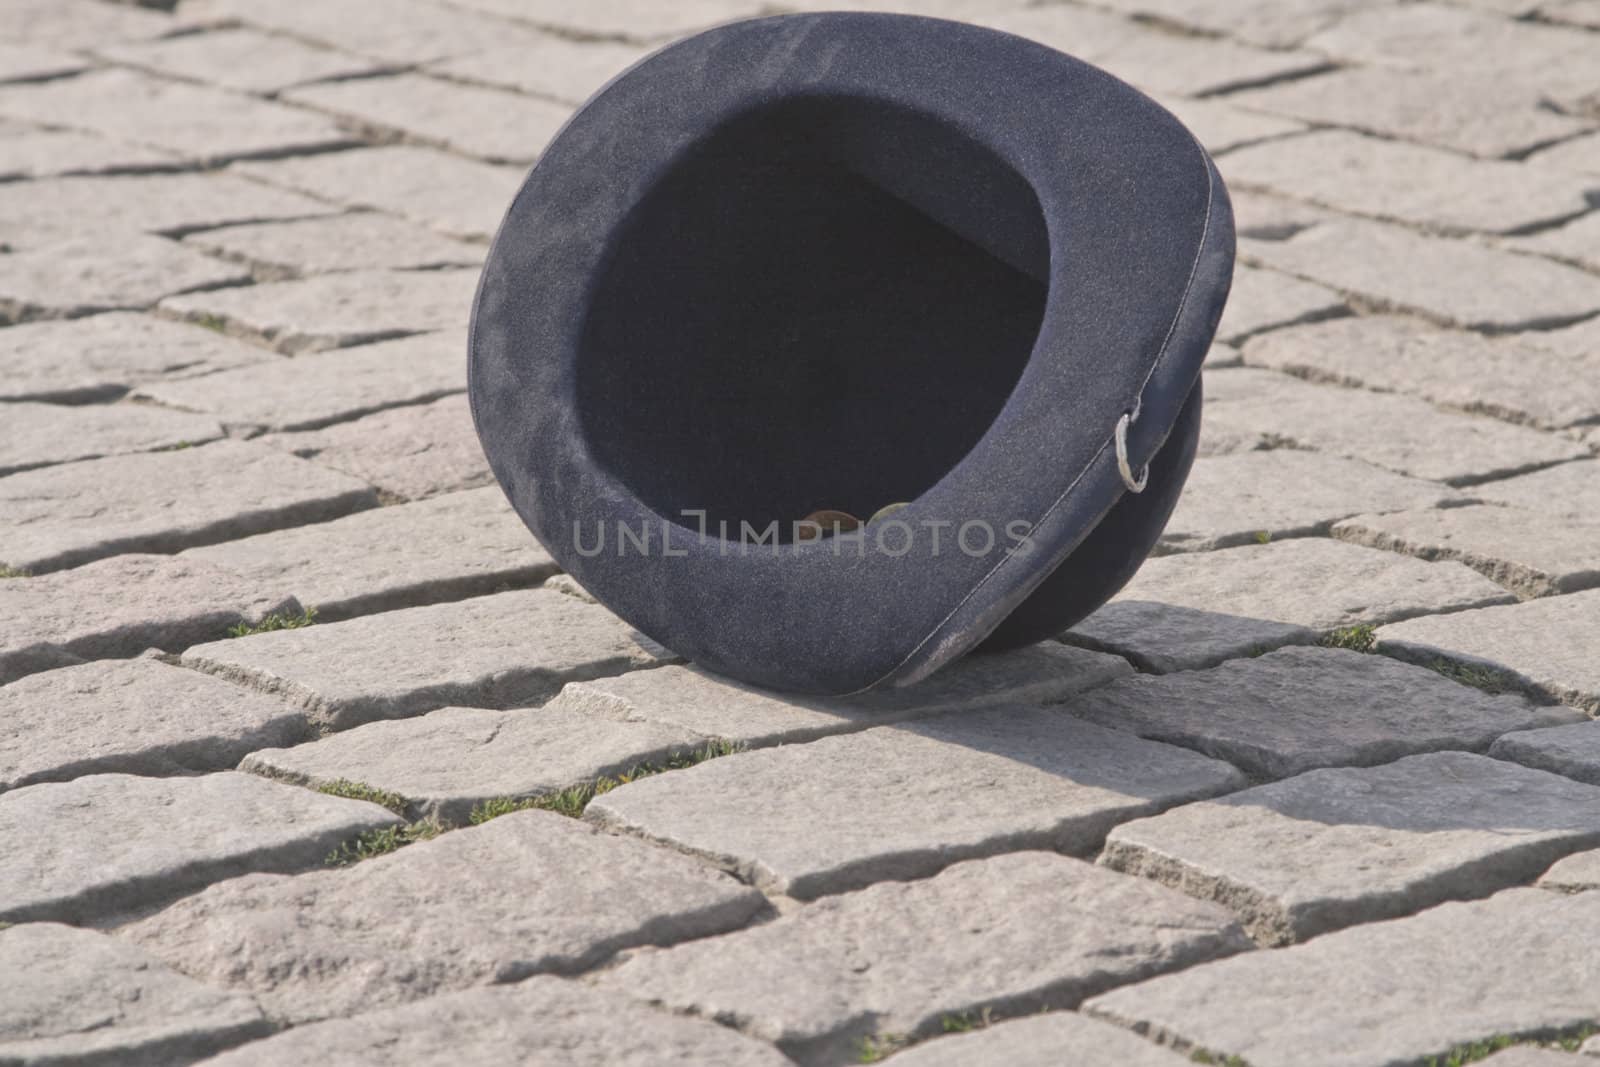 Street artist's black felt hat used for collecting funds in a pavement street. Location:Charles Bridge,Prague.